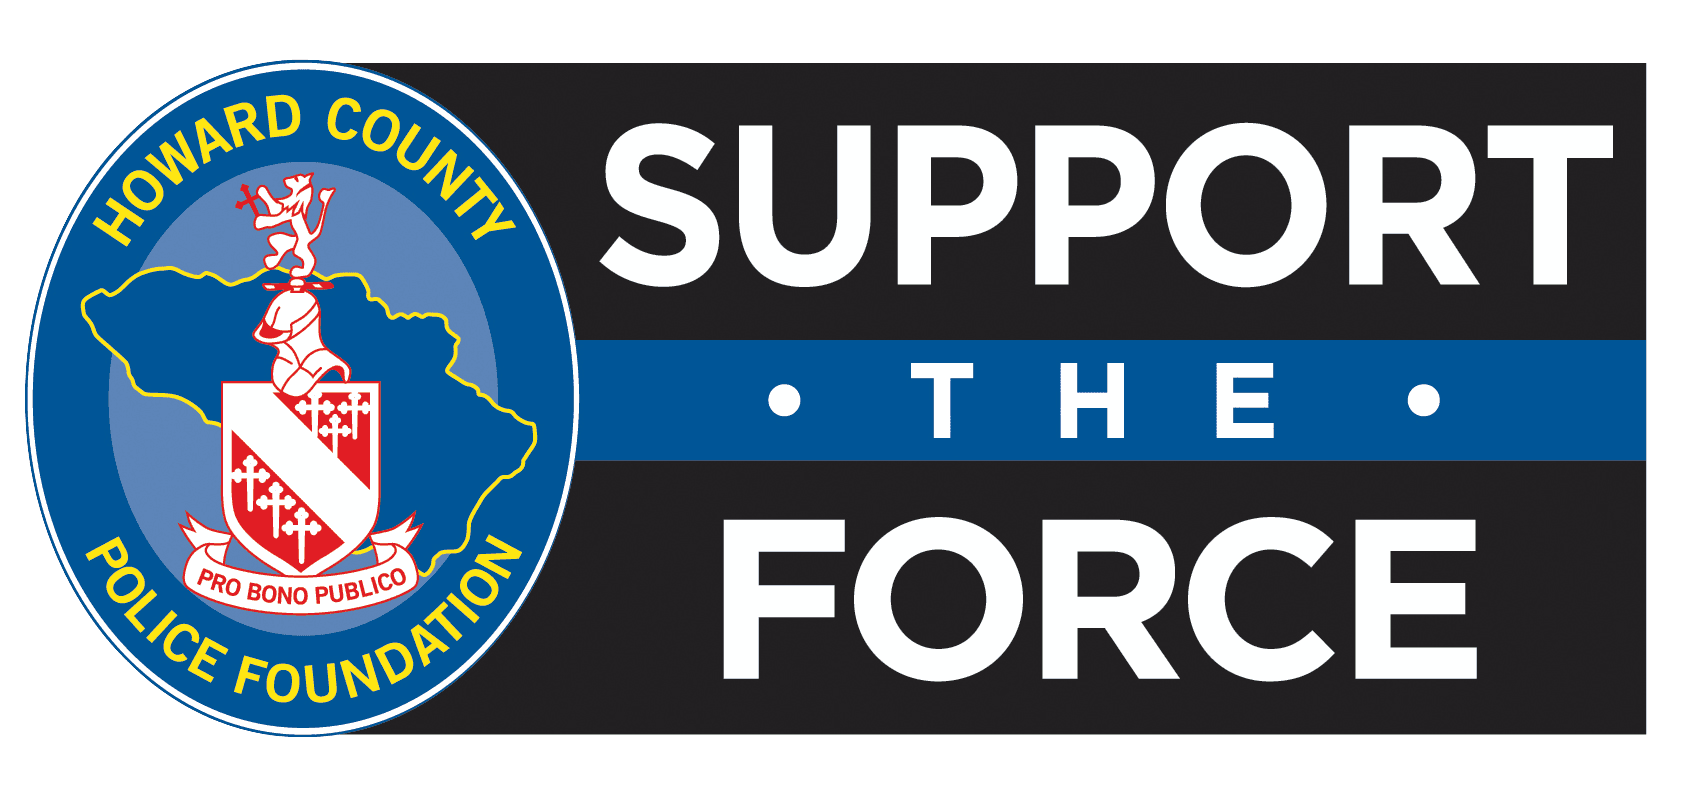 A banner to support the police force